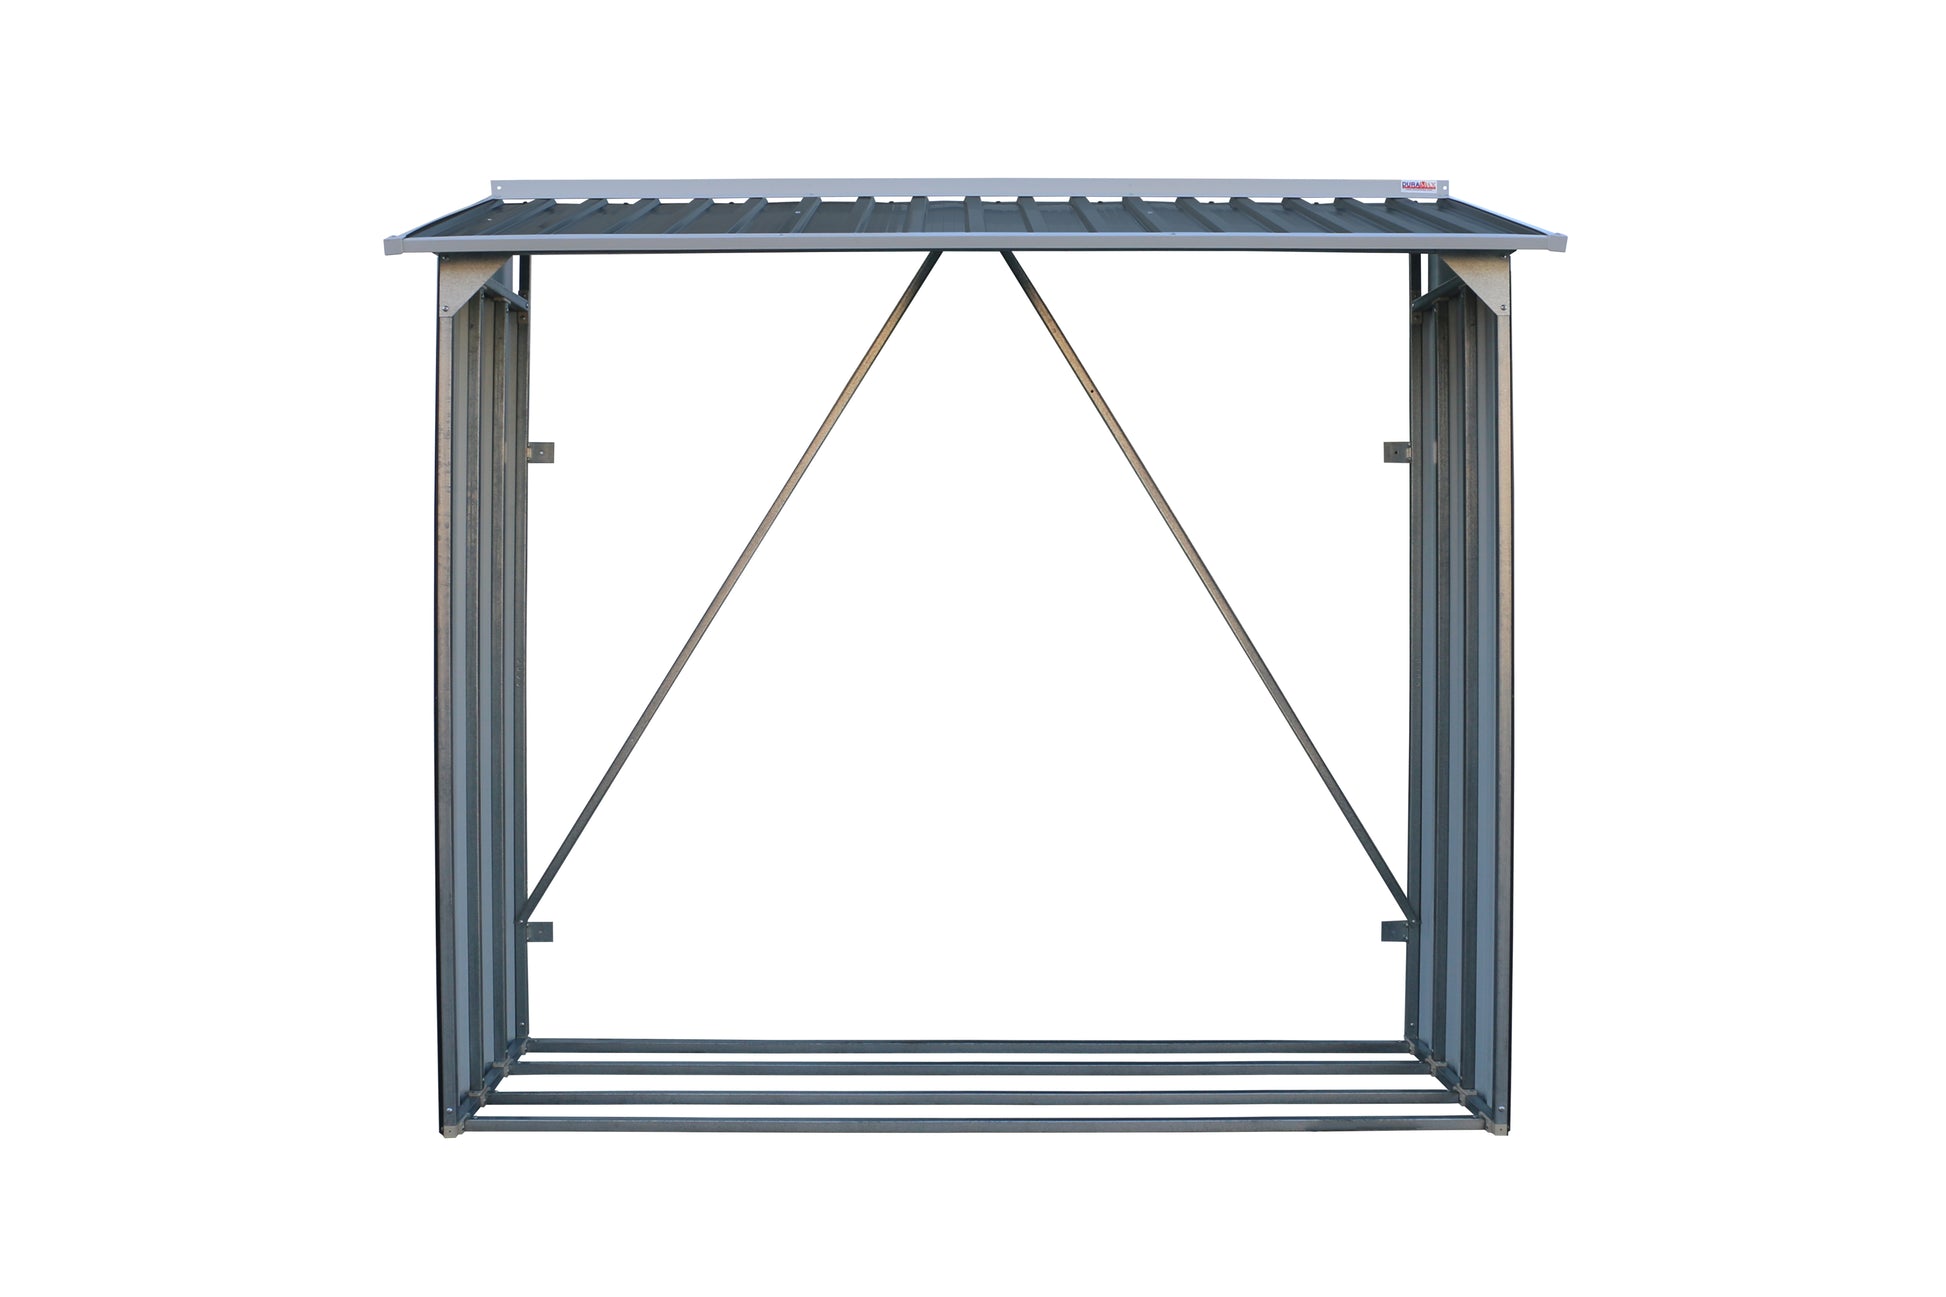 Dark grey metal woodstore, ideal for storing big amounts of firewood, keeping them dry and safe.